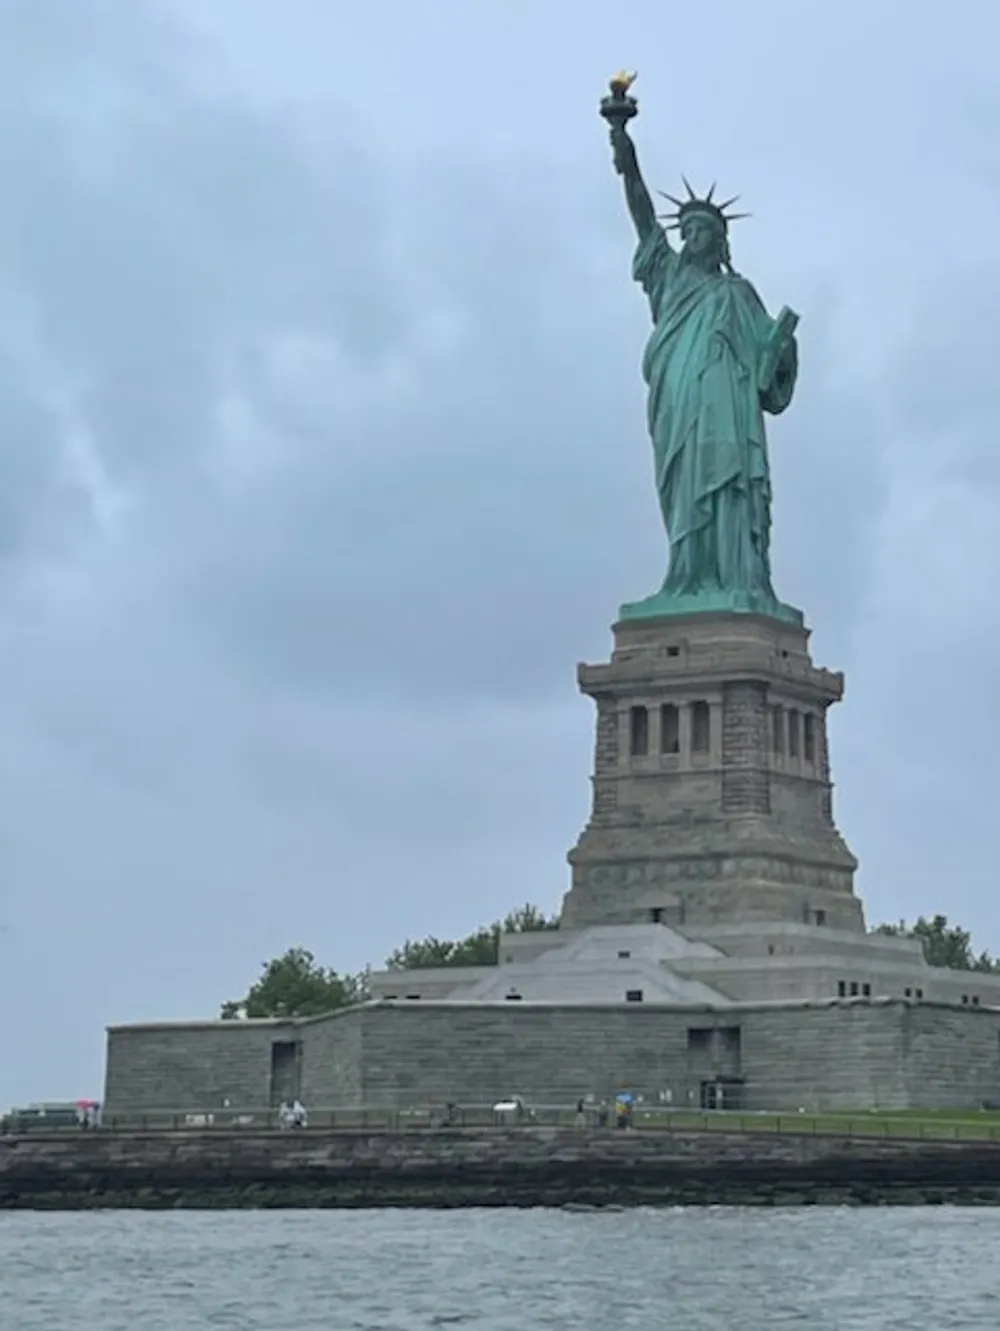 The image shows the Statue of Liberty on a cloudy day as viewed from the water with a focus on the statue and its pedestal